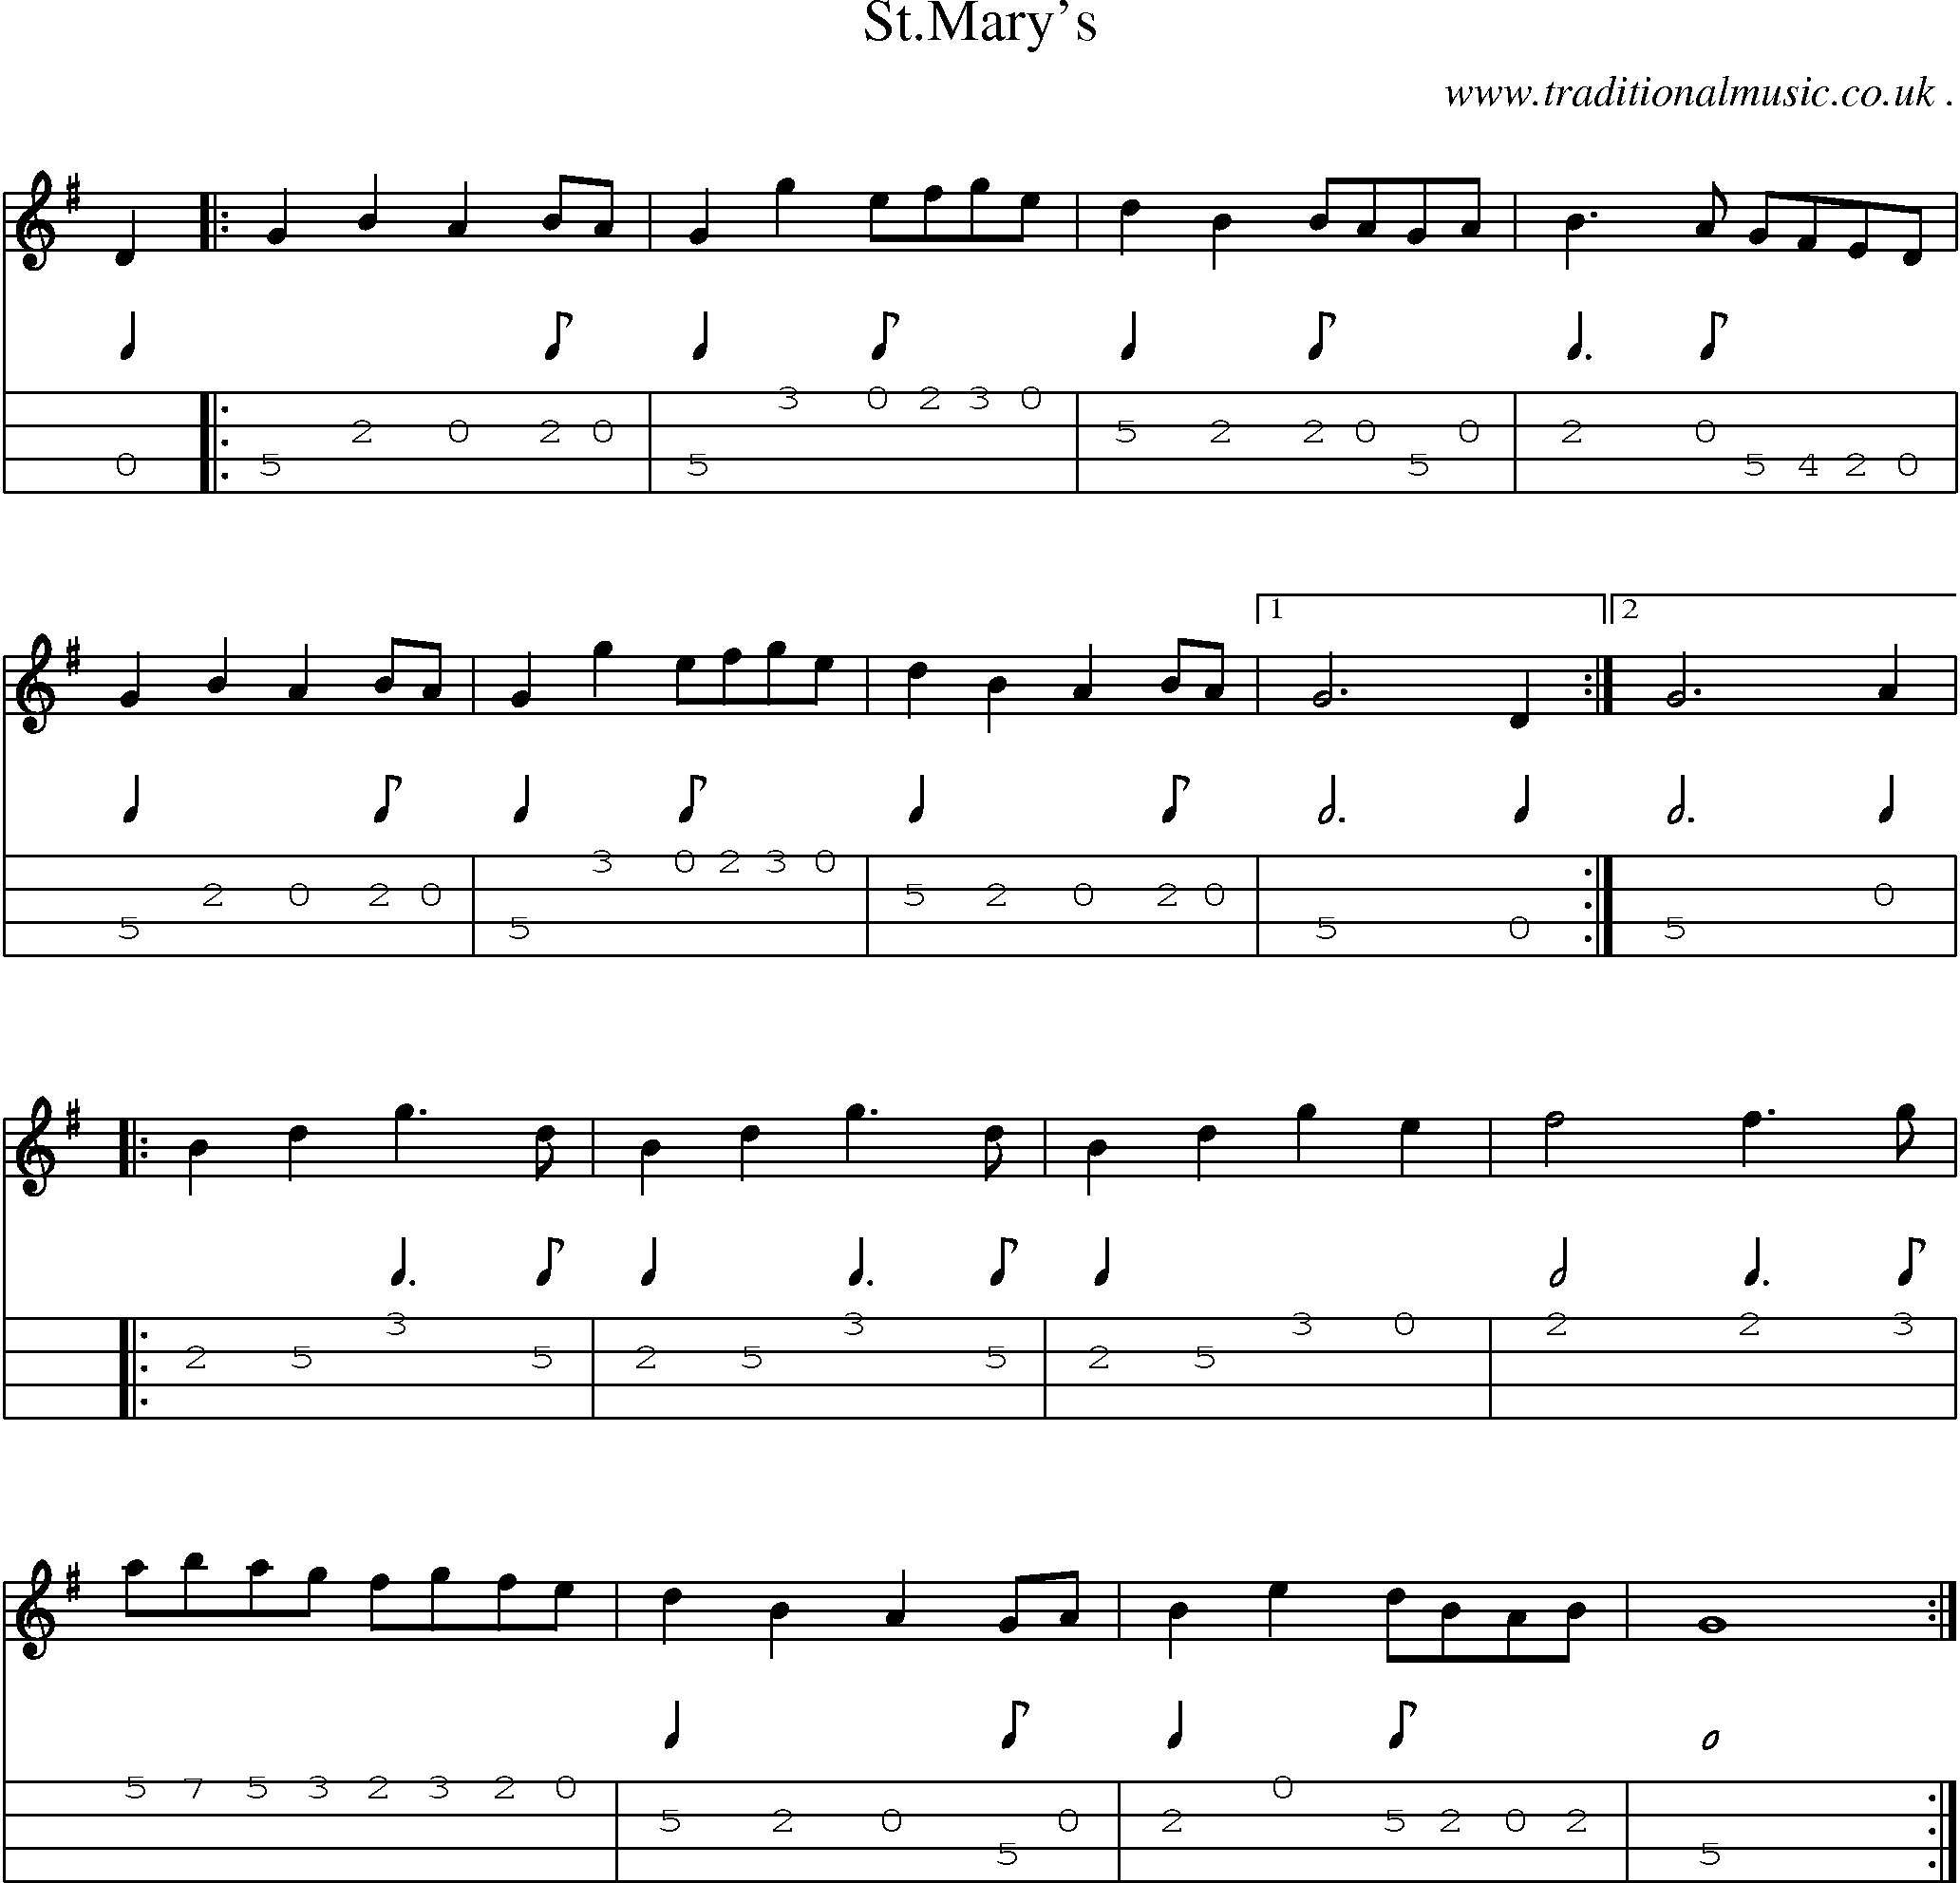 Sheet-Music and Mandolin Tabs for Stmarys